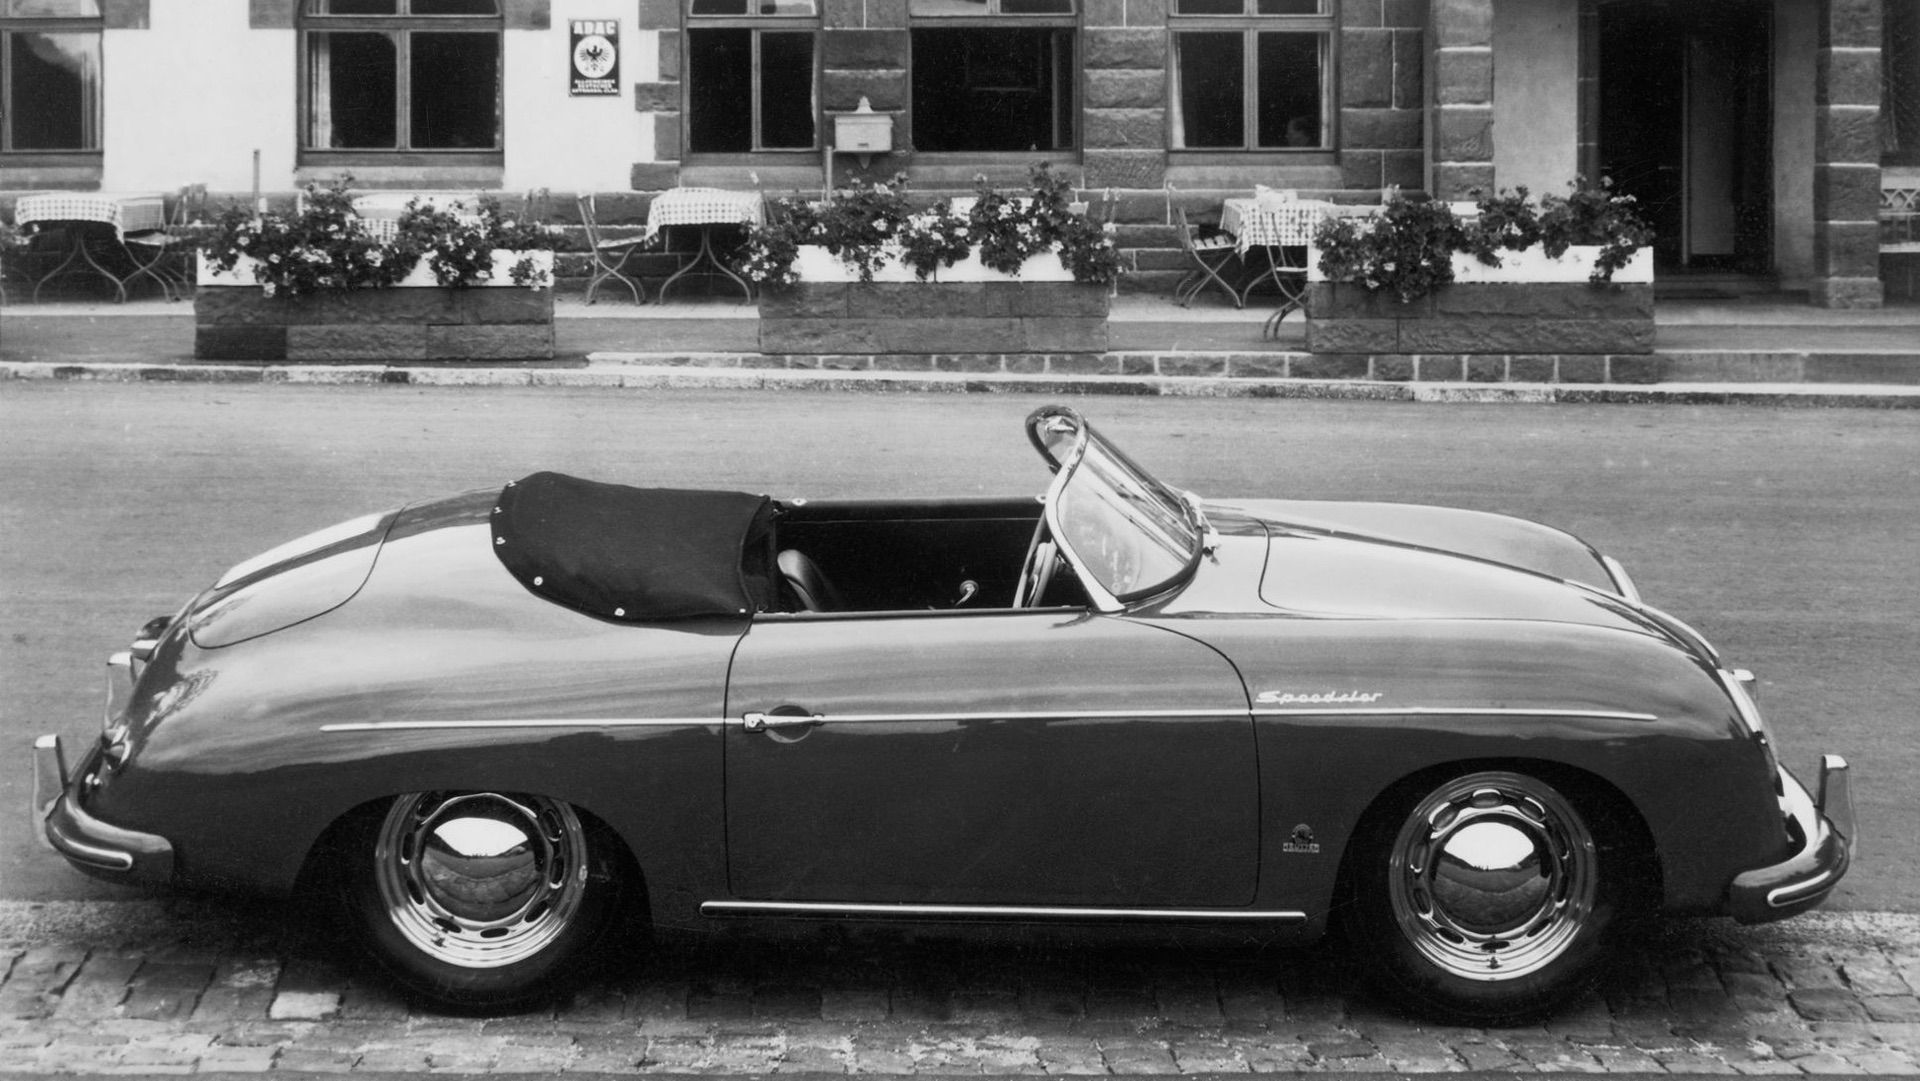 1955 356 Speedster parked on the road